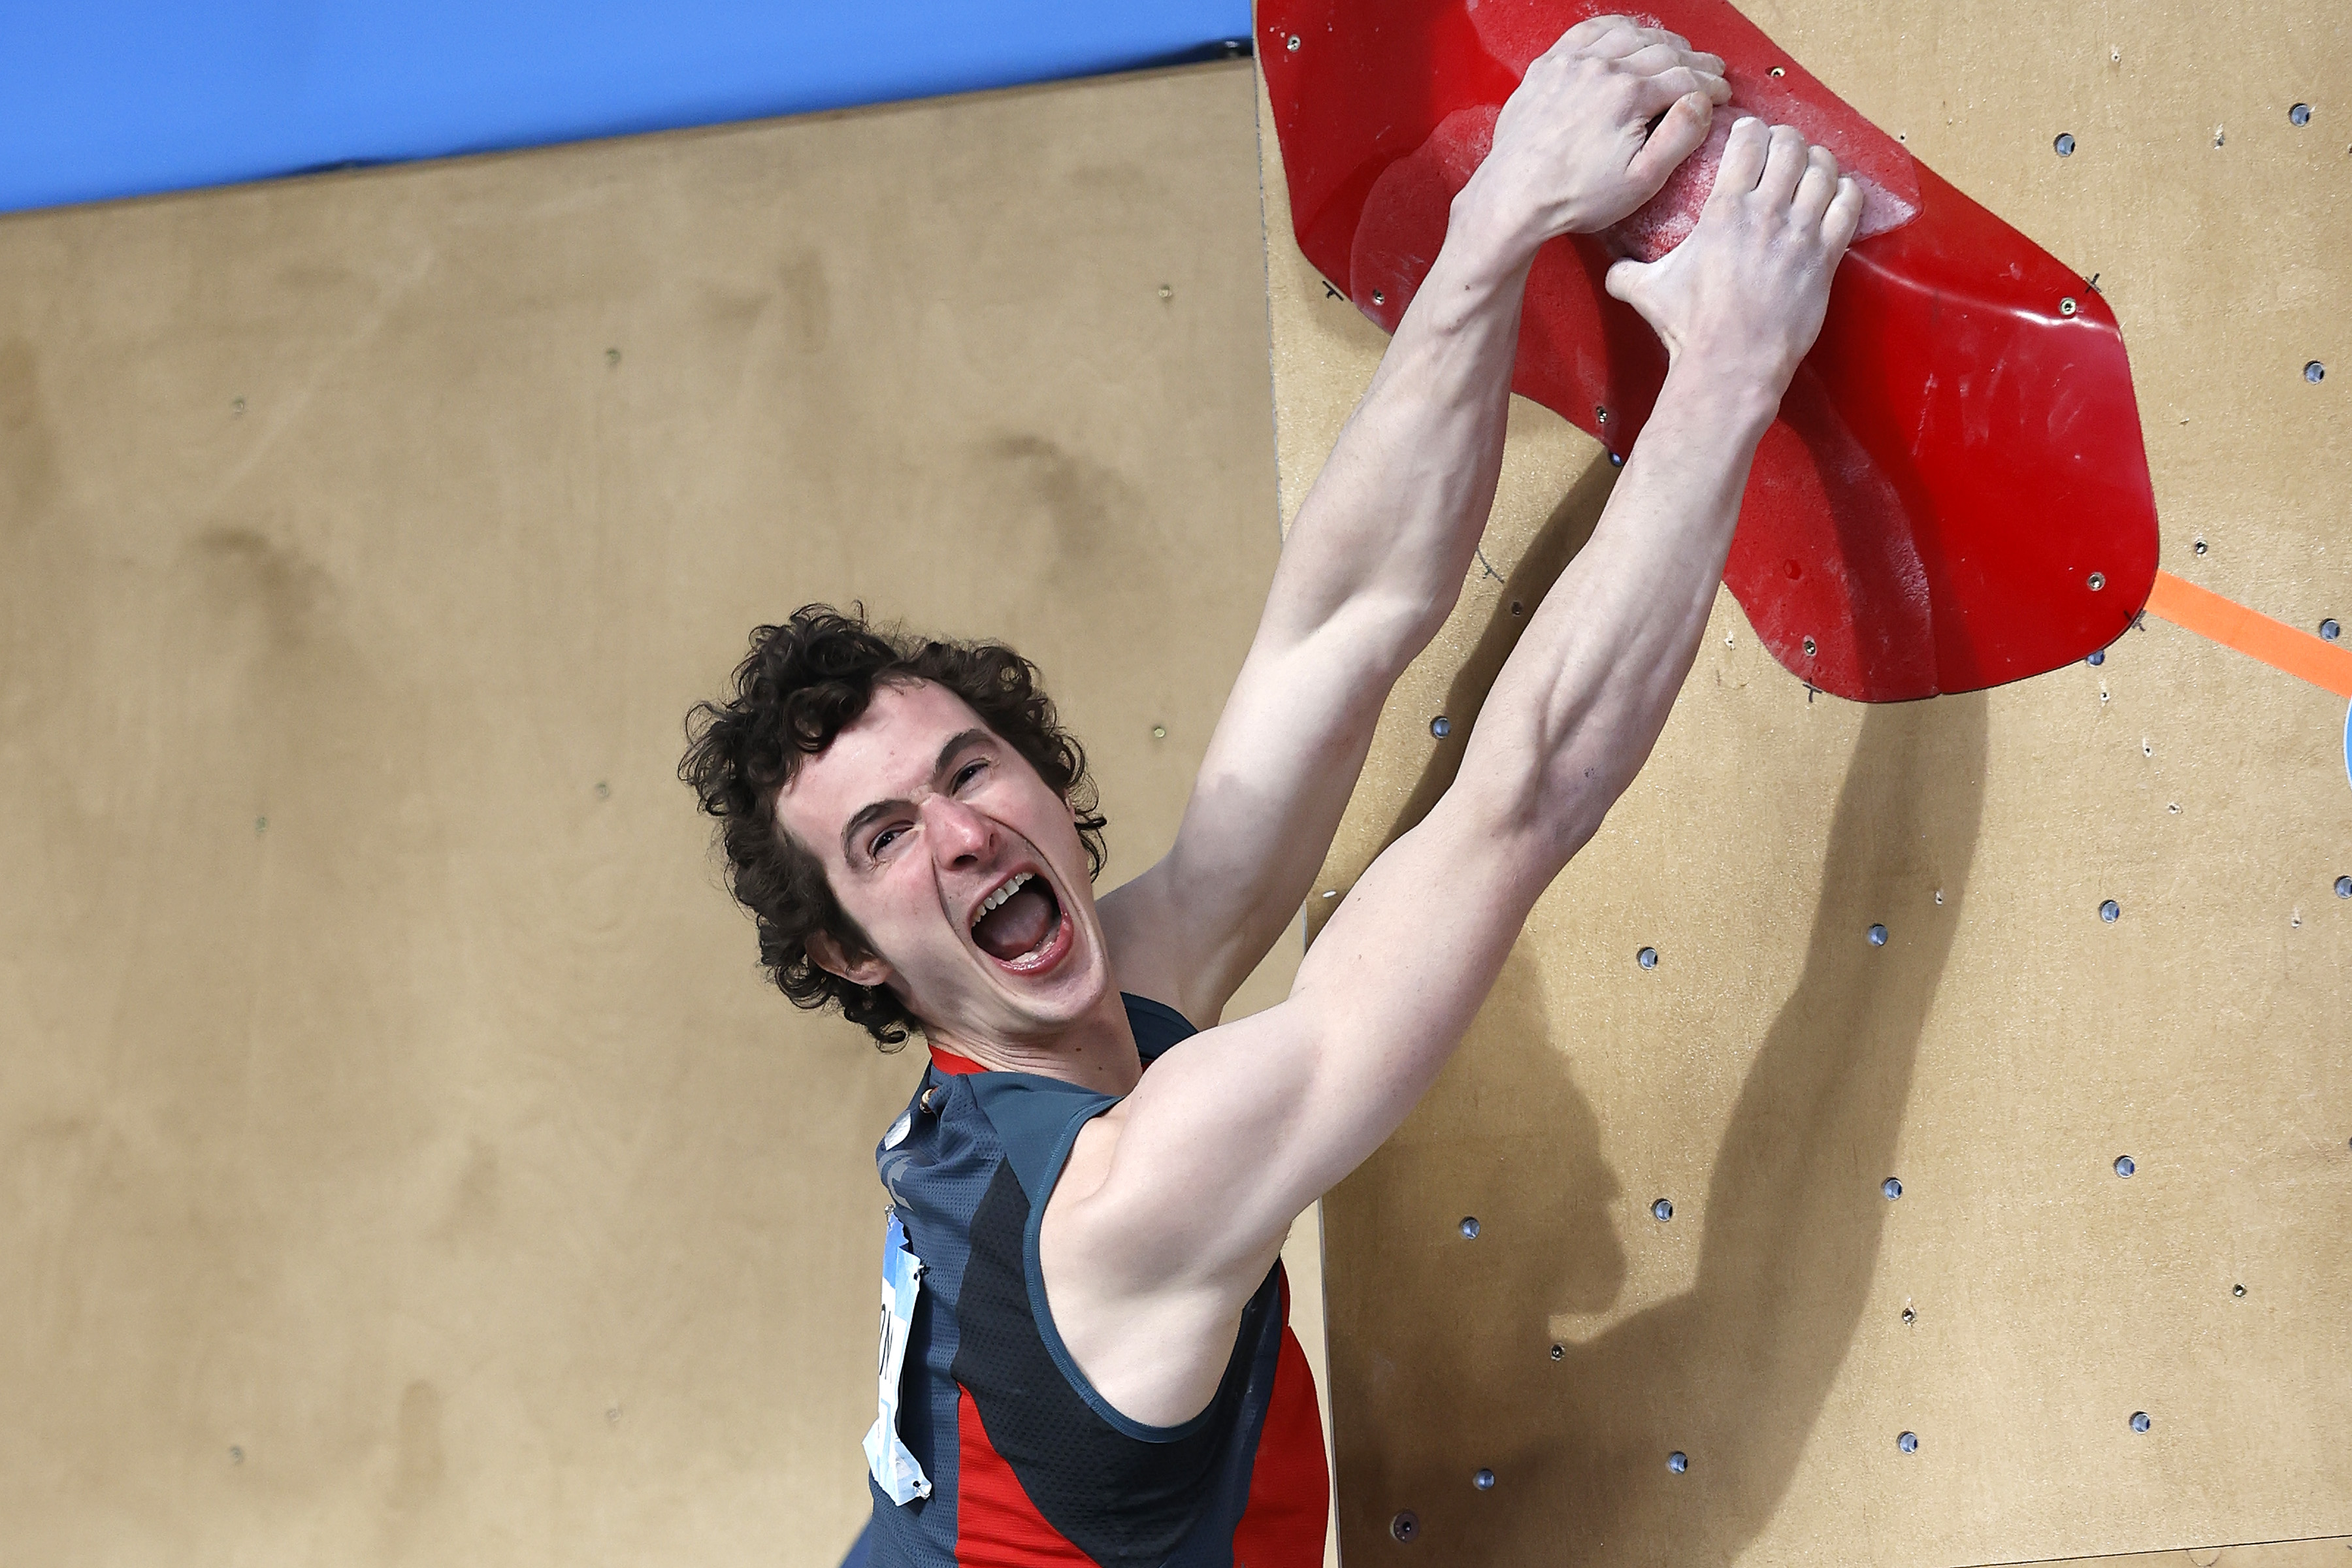 Sport climbing-Five to watch at the Tokyo Olympics